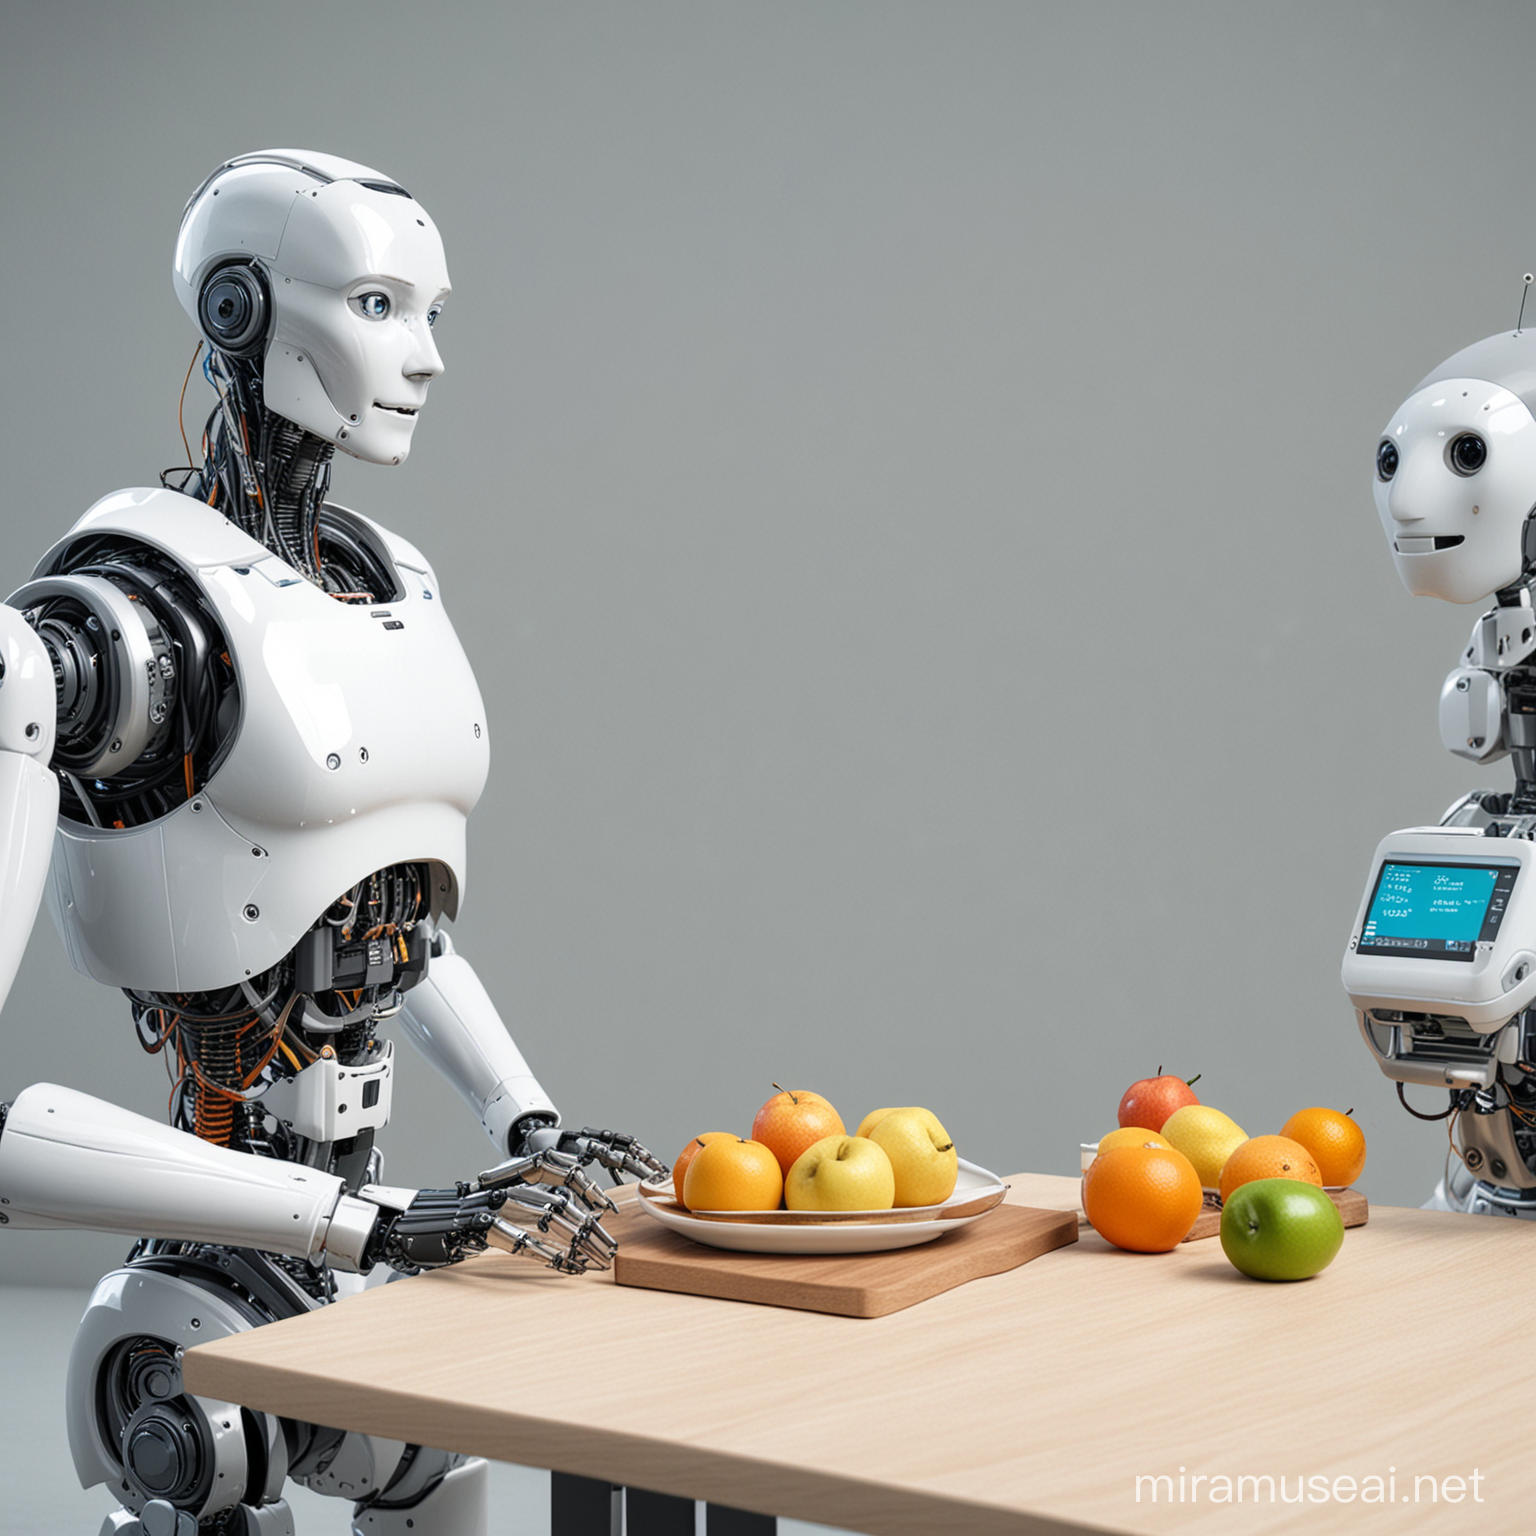 Robotic Dietary Coaching for Weight Management